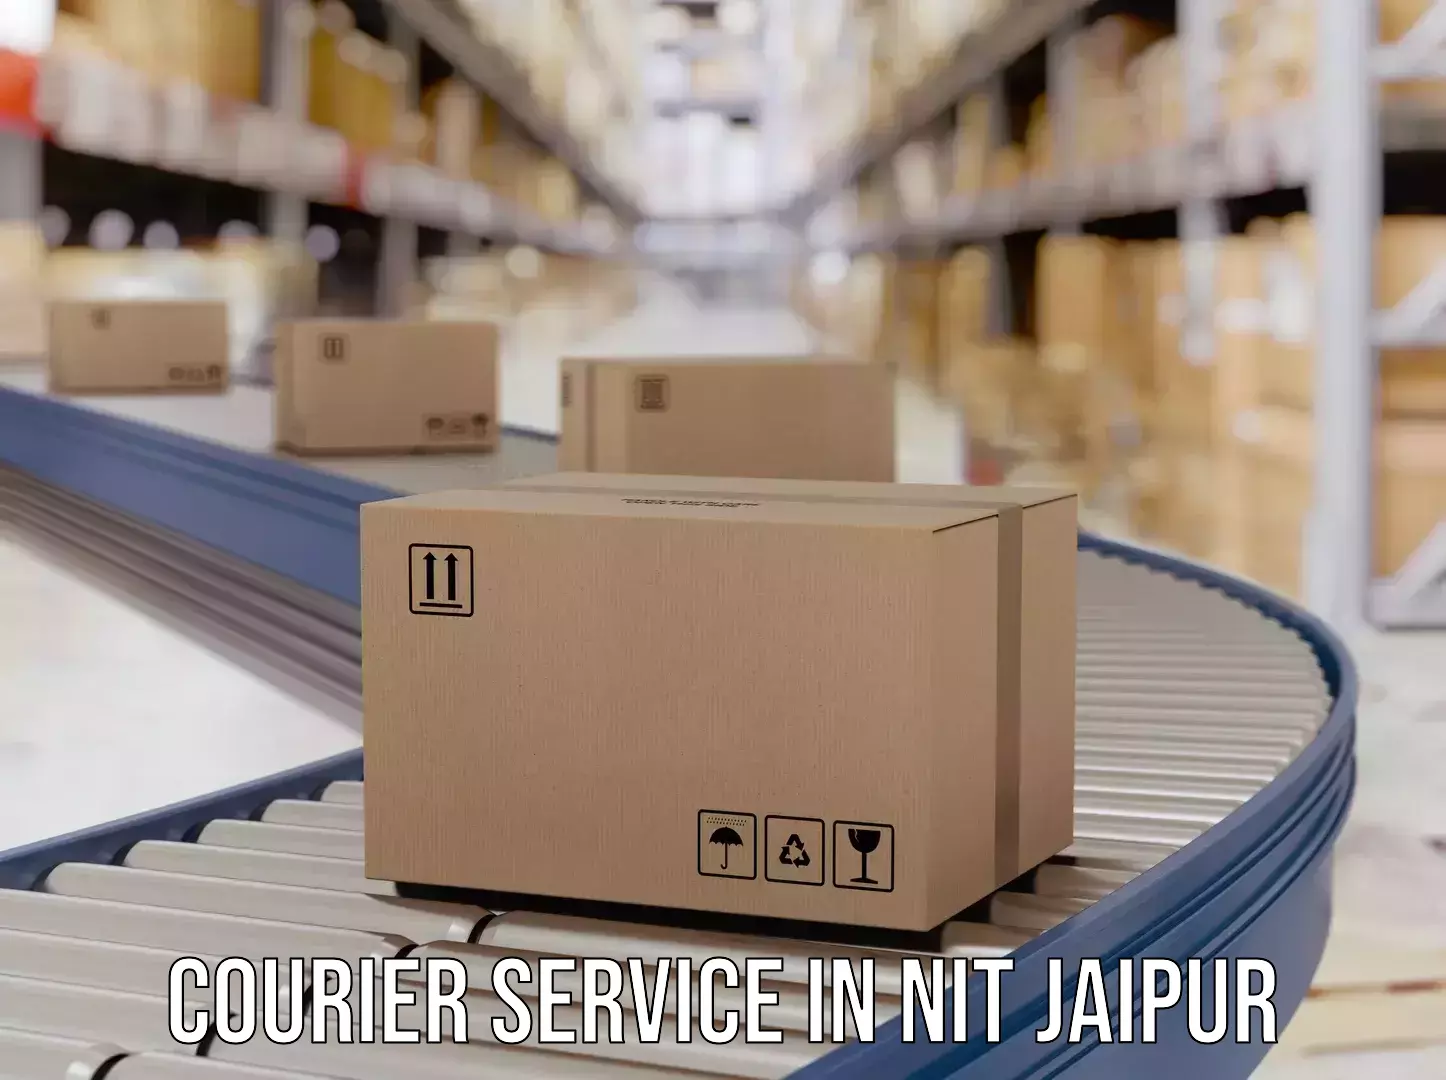 Customer-oriented courier services in NIT Jaipur